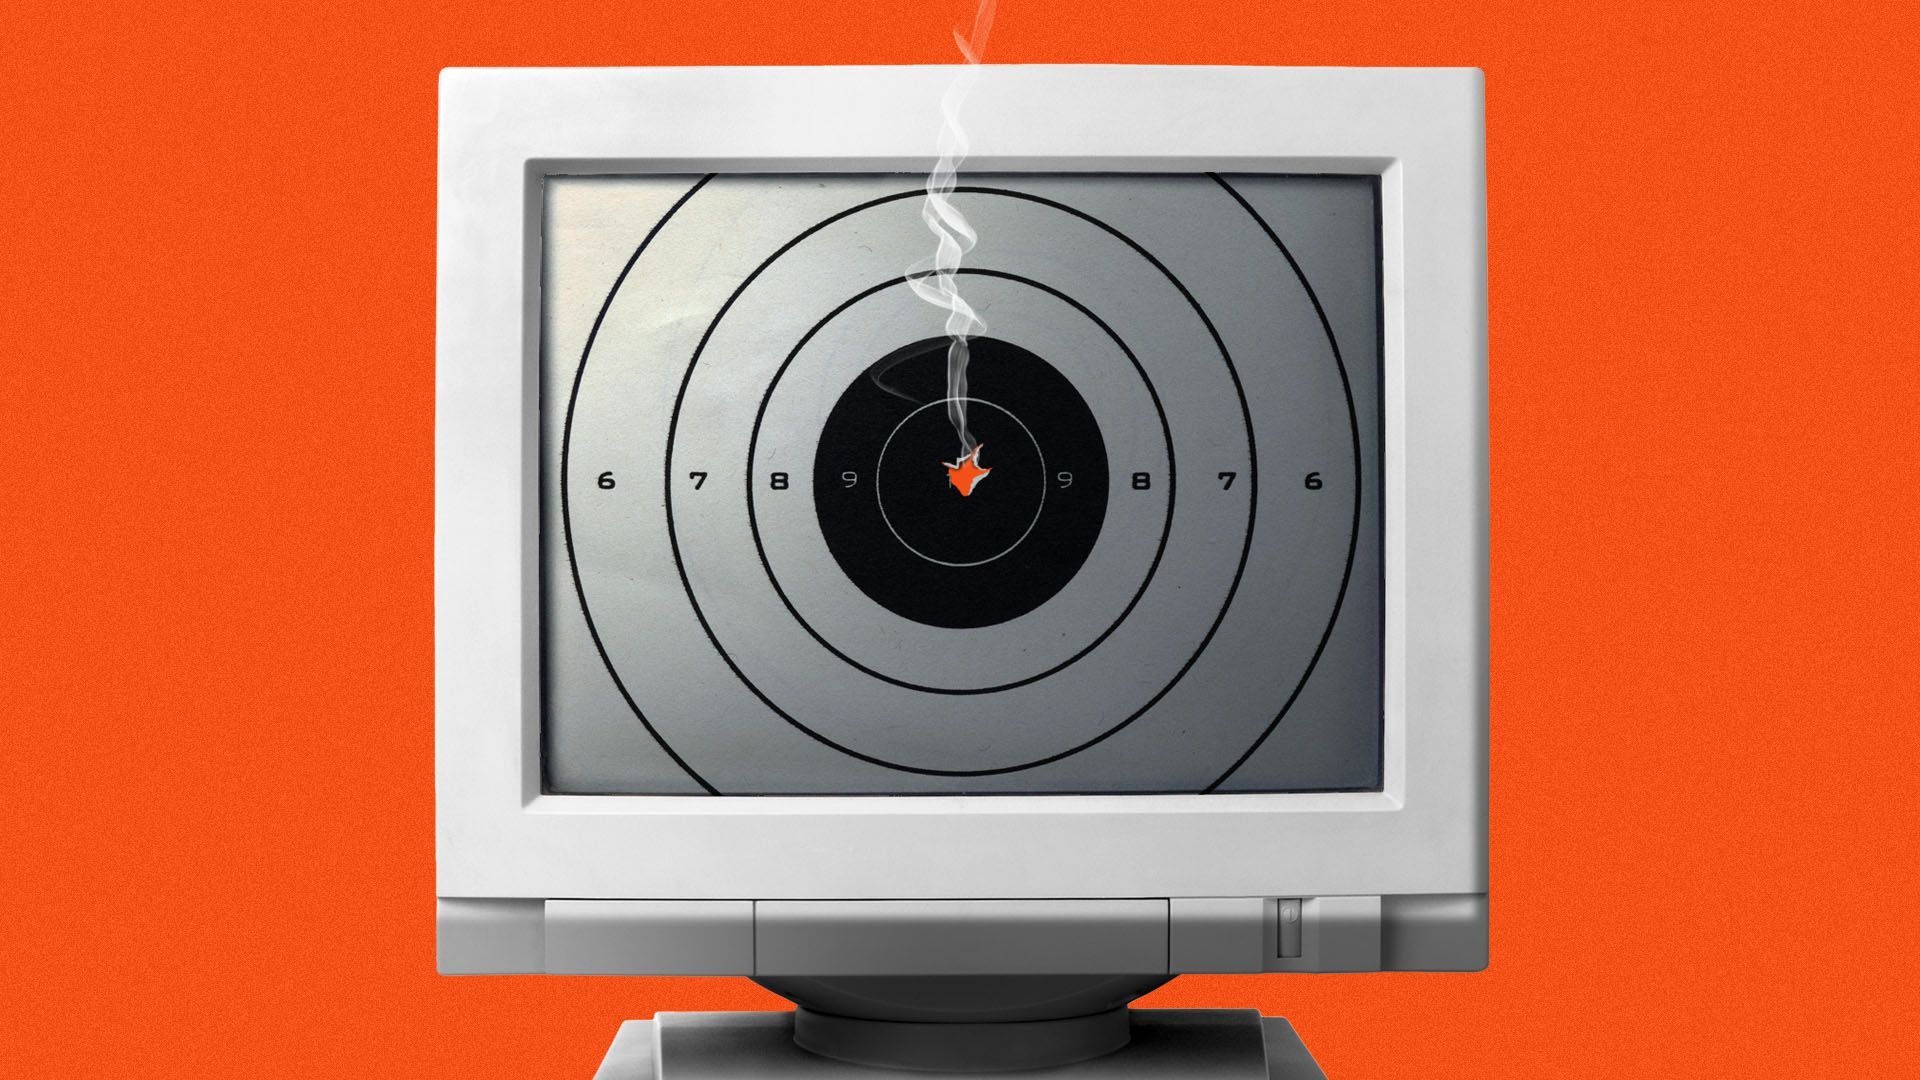 Illustration of a computer monitor with a target on the screen and a smoking bullet hole in the center 